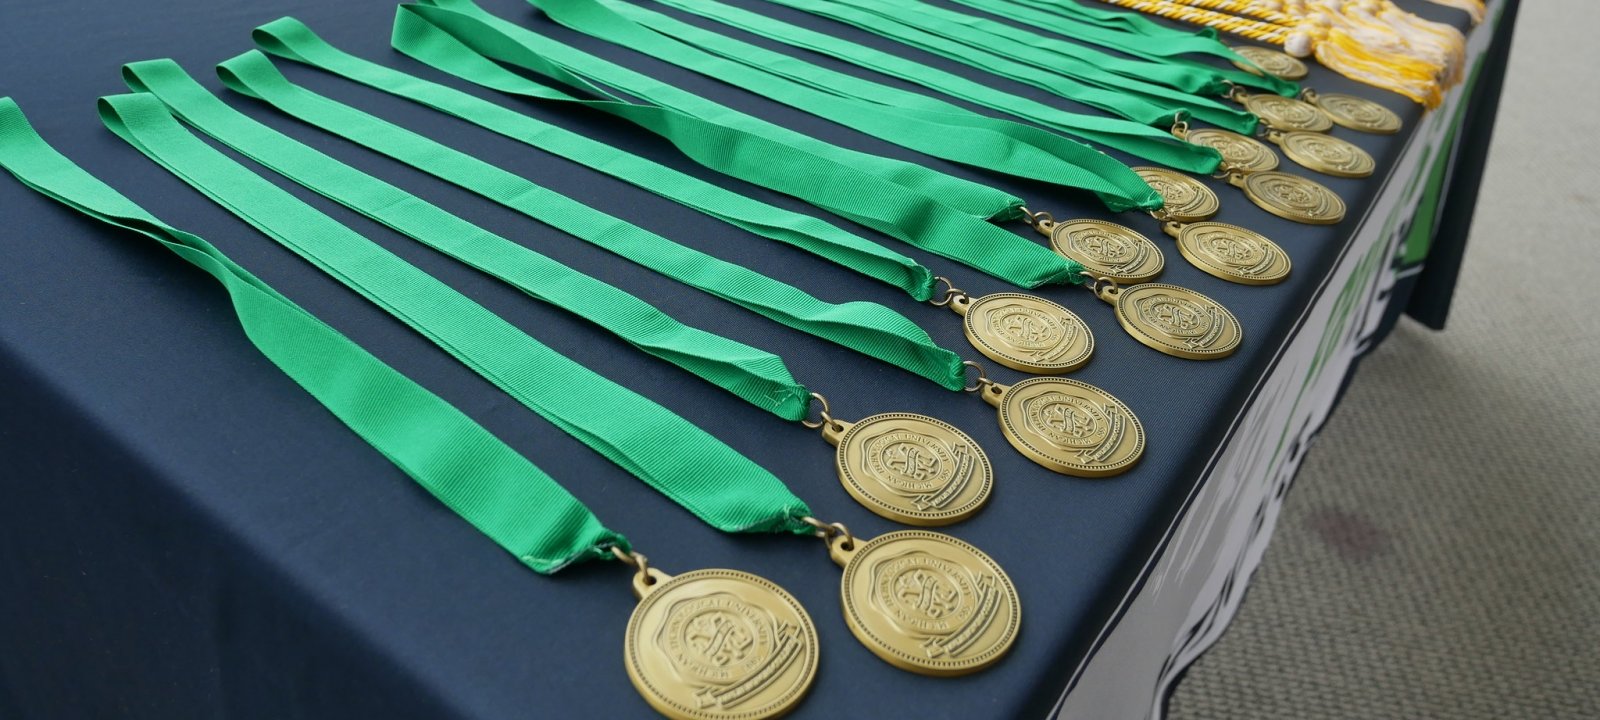 A table full of Honors medallions